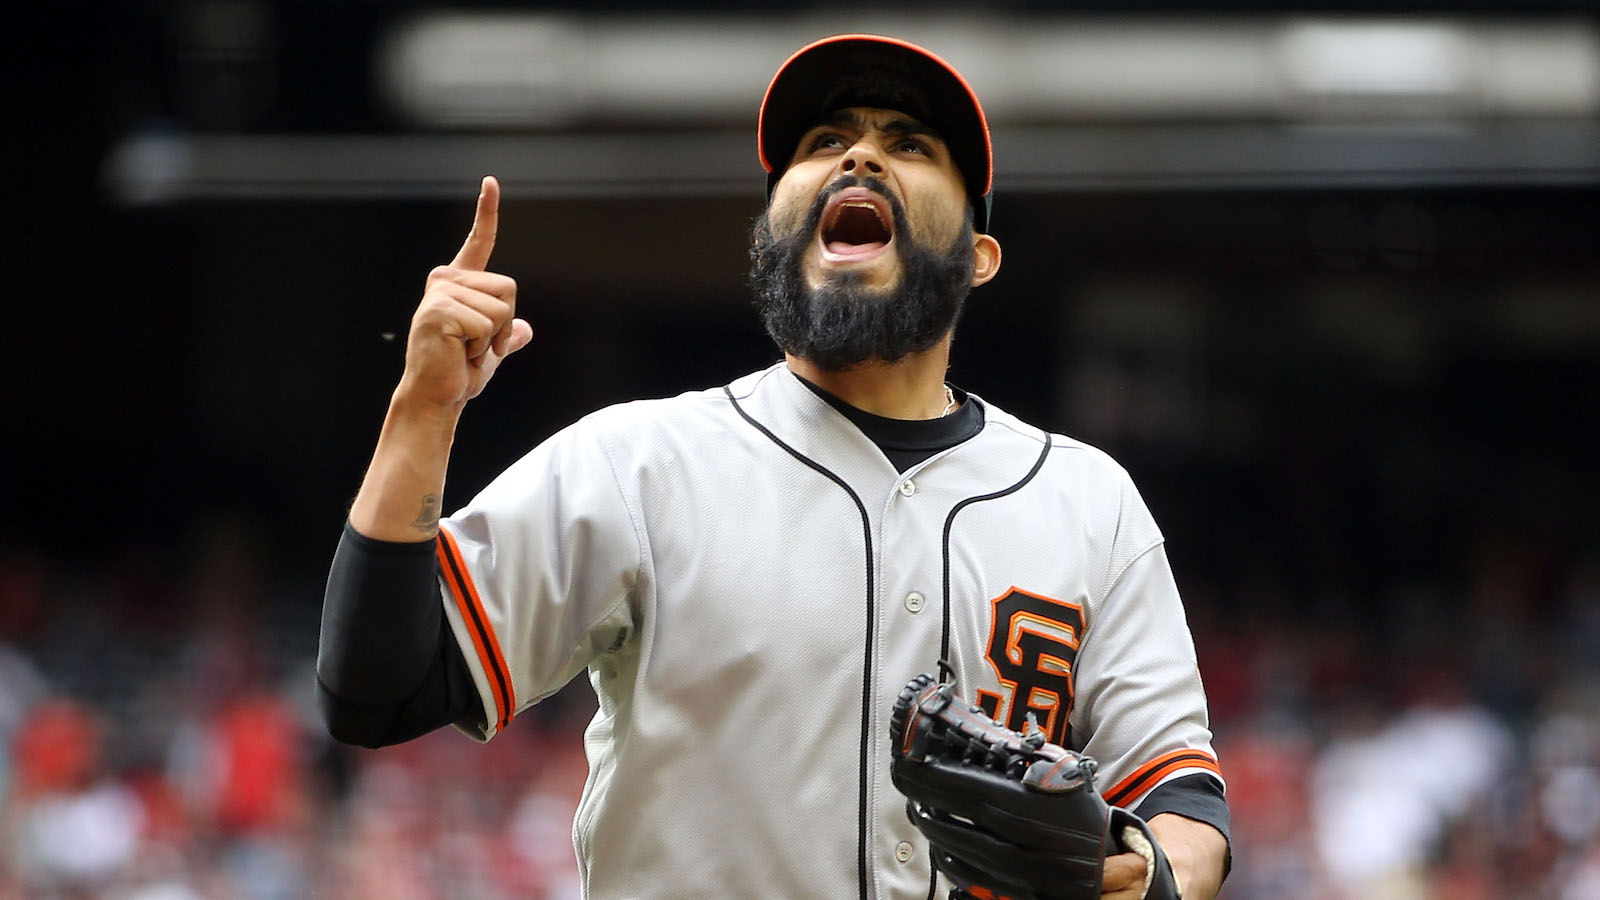 Relief pitcher Sergio Romo #54 of the San Francisco Giants reacts after getting out of the seventh inning against the Arizona Diamondbacks during the MLB game at Chase Field on April 8, 2012 in Phoenix, Arizona.